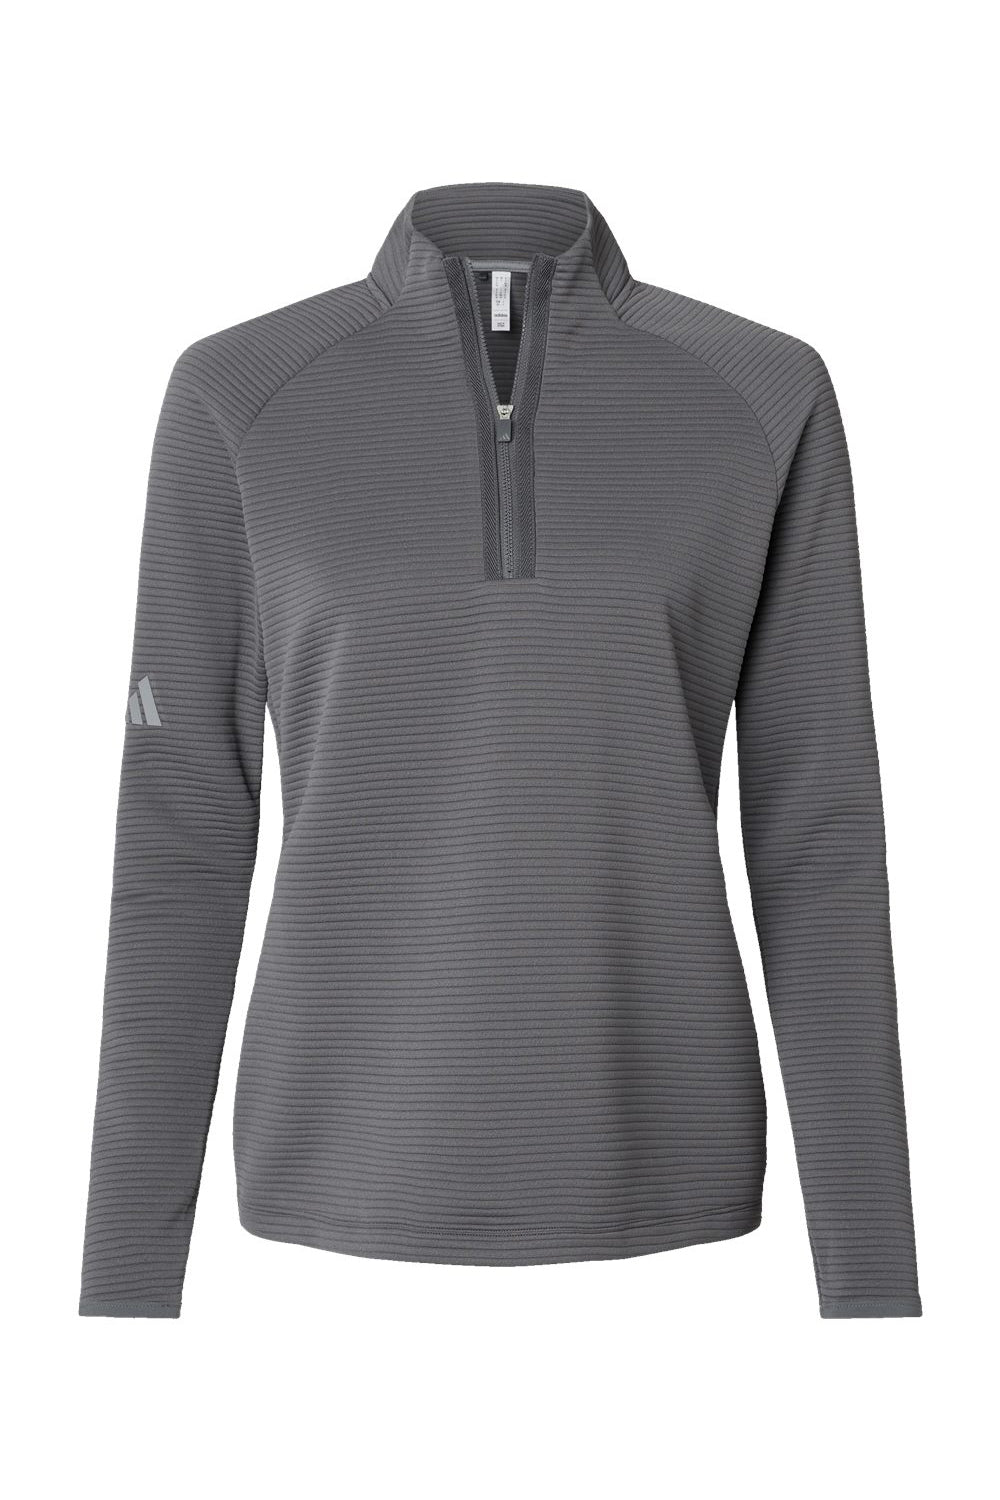 Adidas A589 Womens Spacer 1/4 Zip Pullover Grey Flat Front